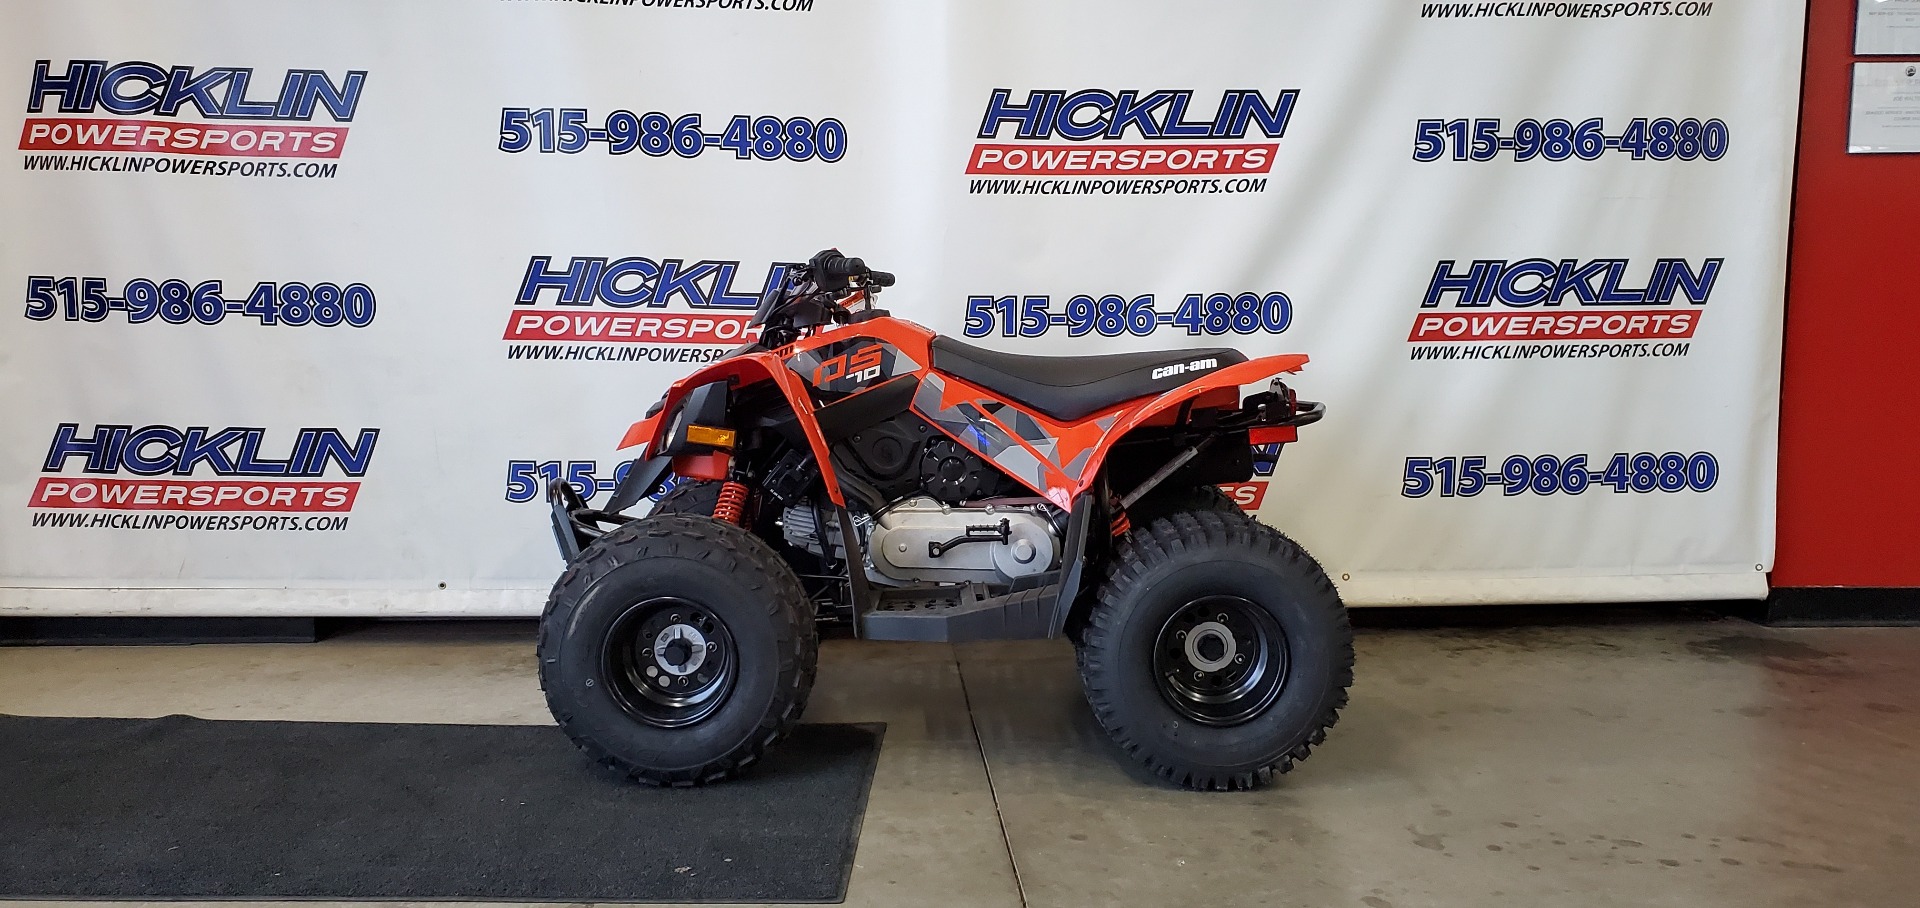 2022 Can-Am DS 70 in Grimes, Iowa - Photo 1